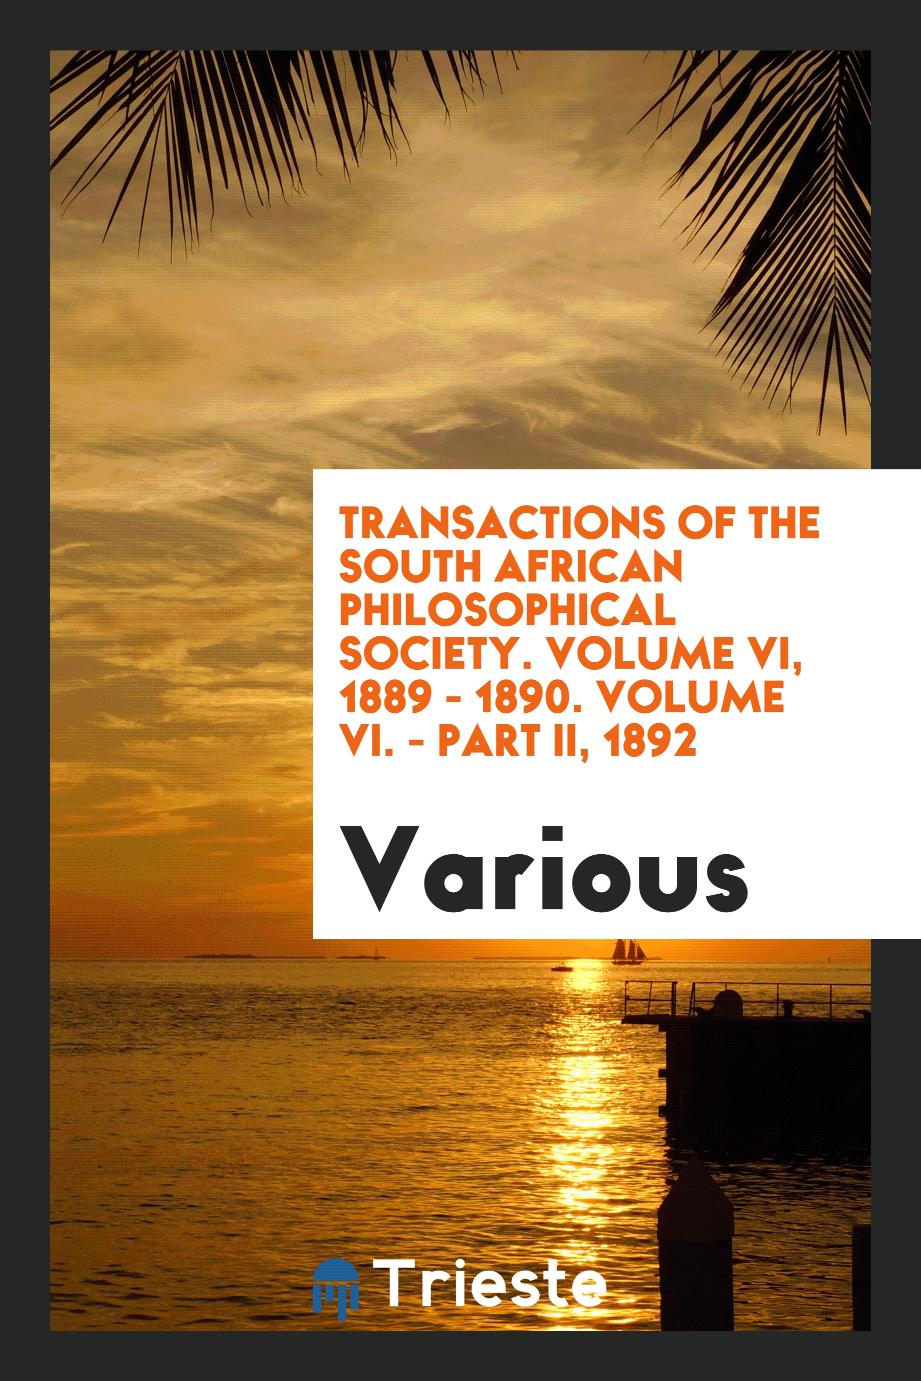 Transactions of the South African Philosophical Society. Volume VI, 1889 - 1890. Volume VI. - Part II, 1892